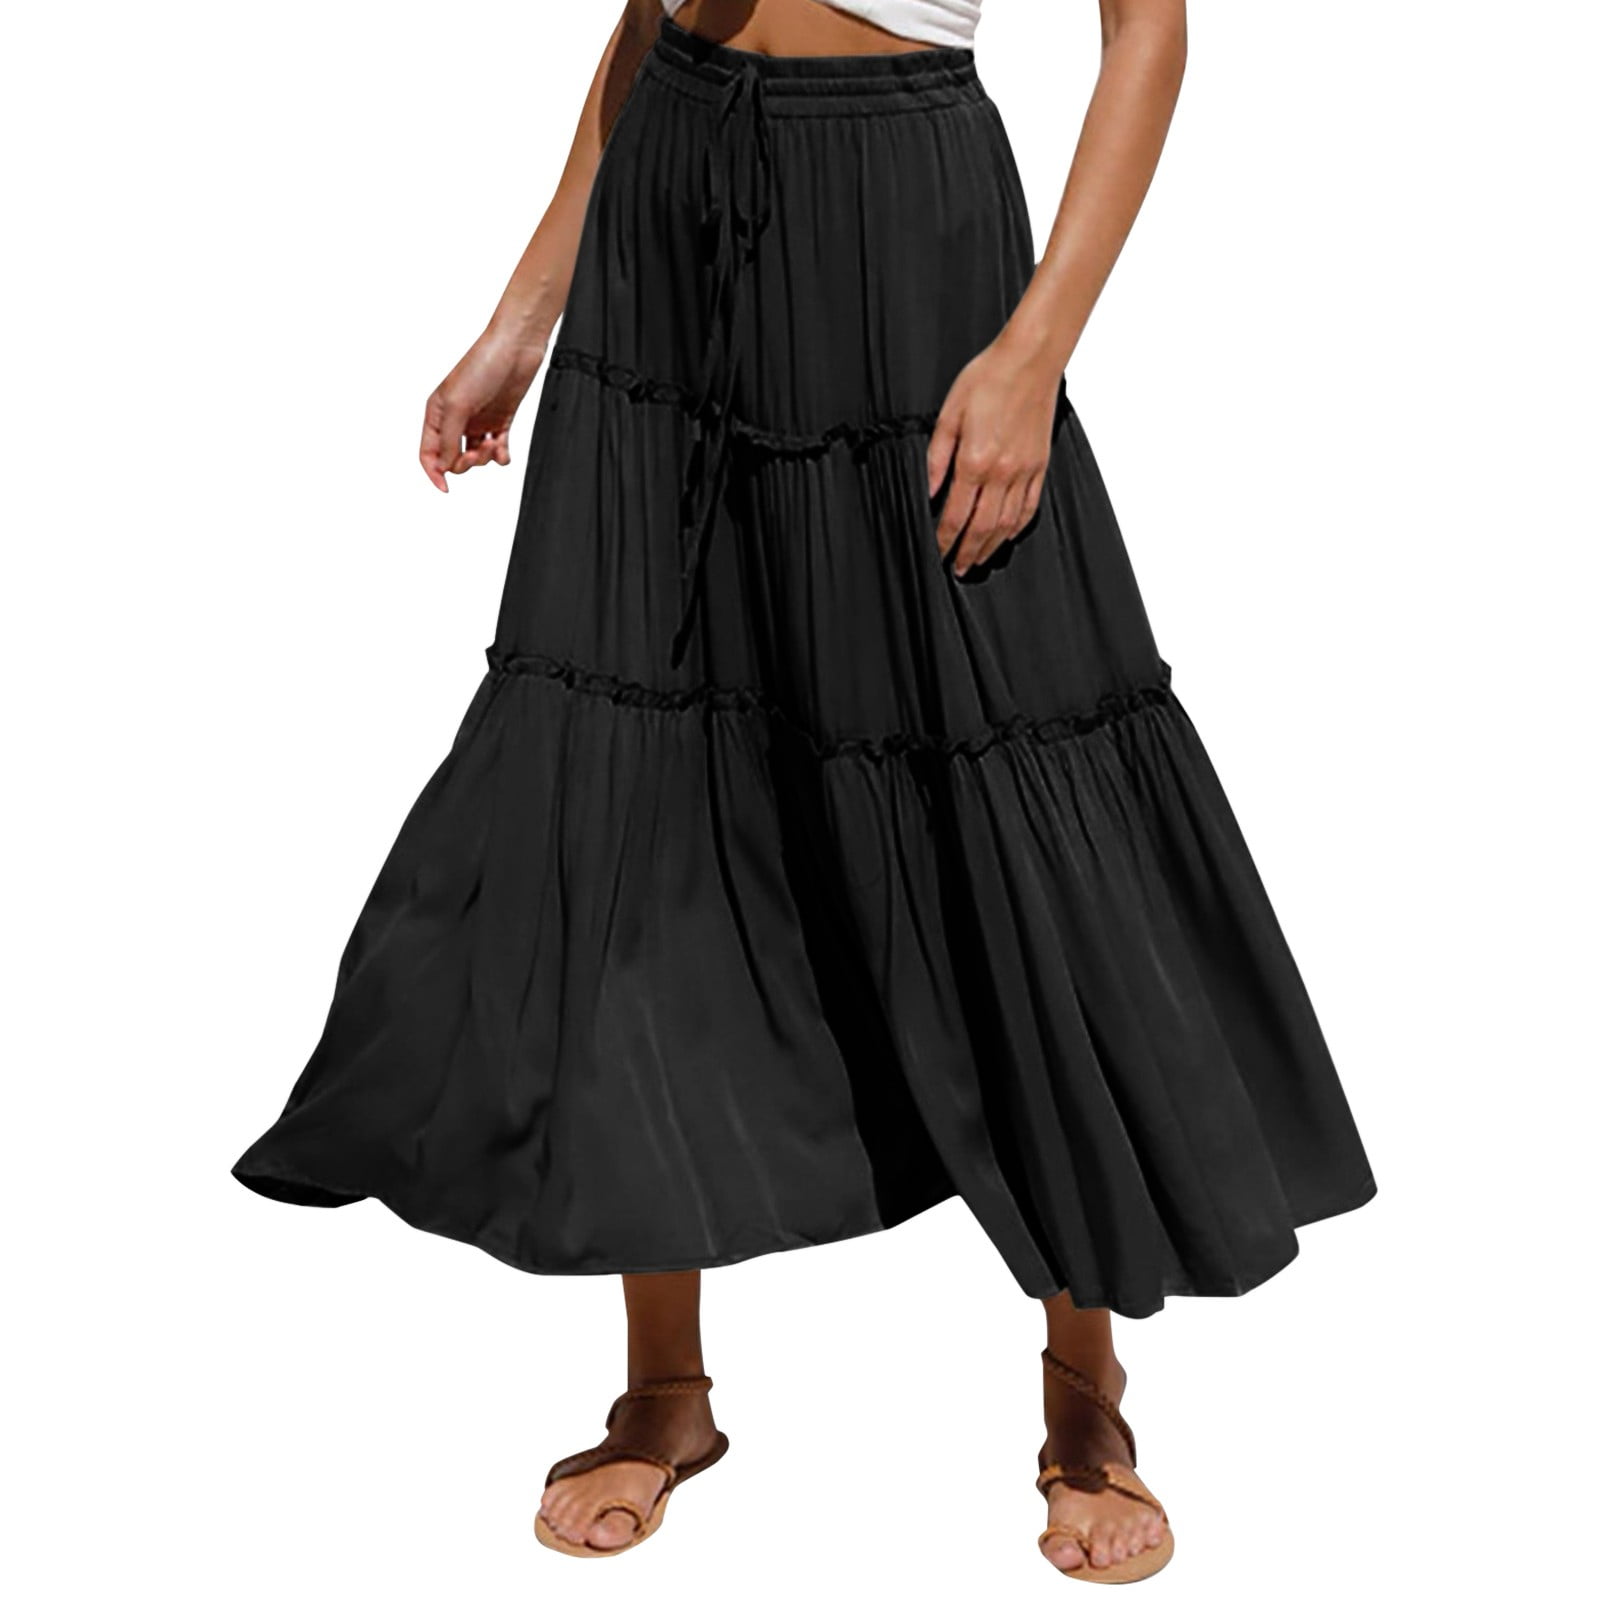 Women Casual Fashion Skirts Solid Color Pleated Irregular Half